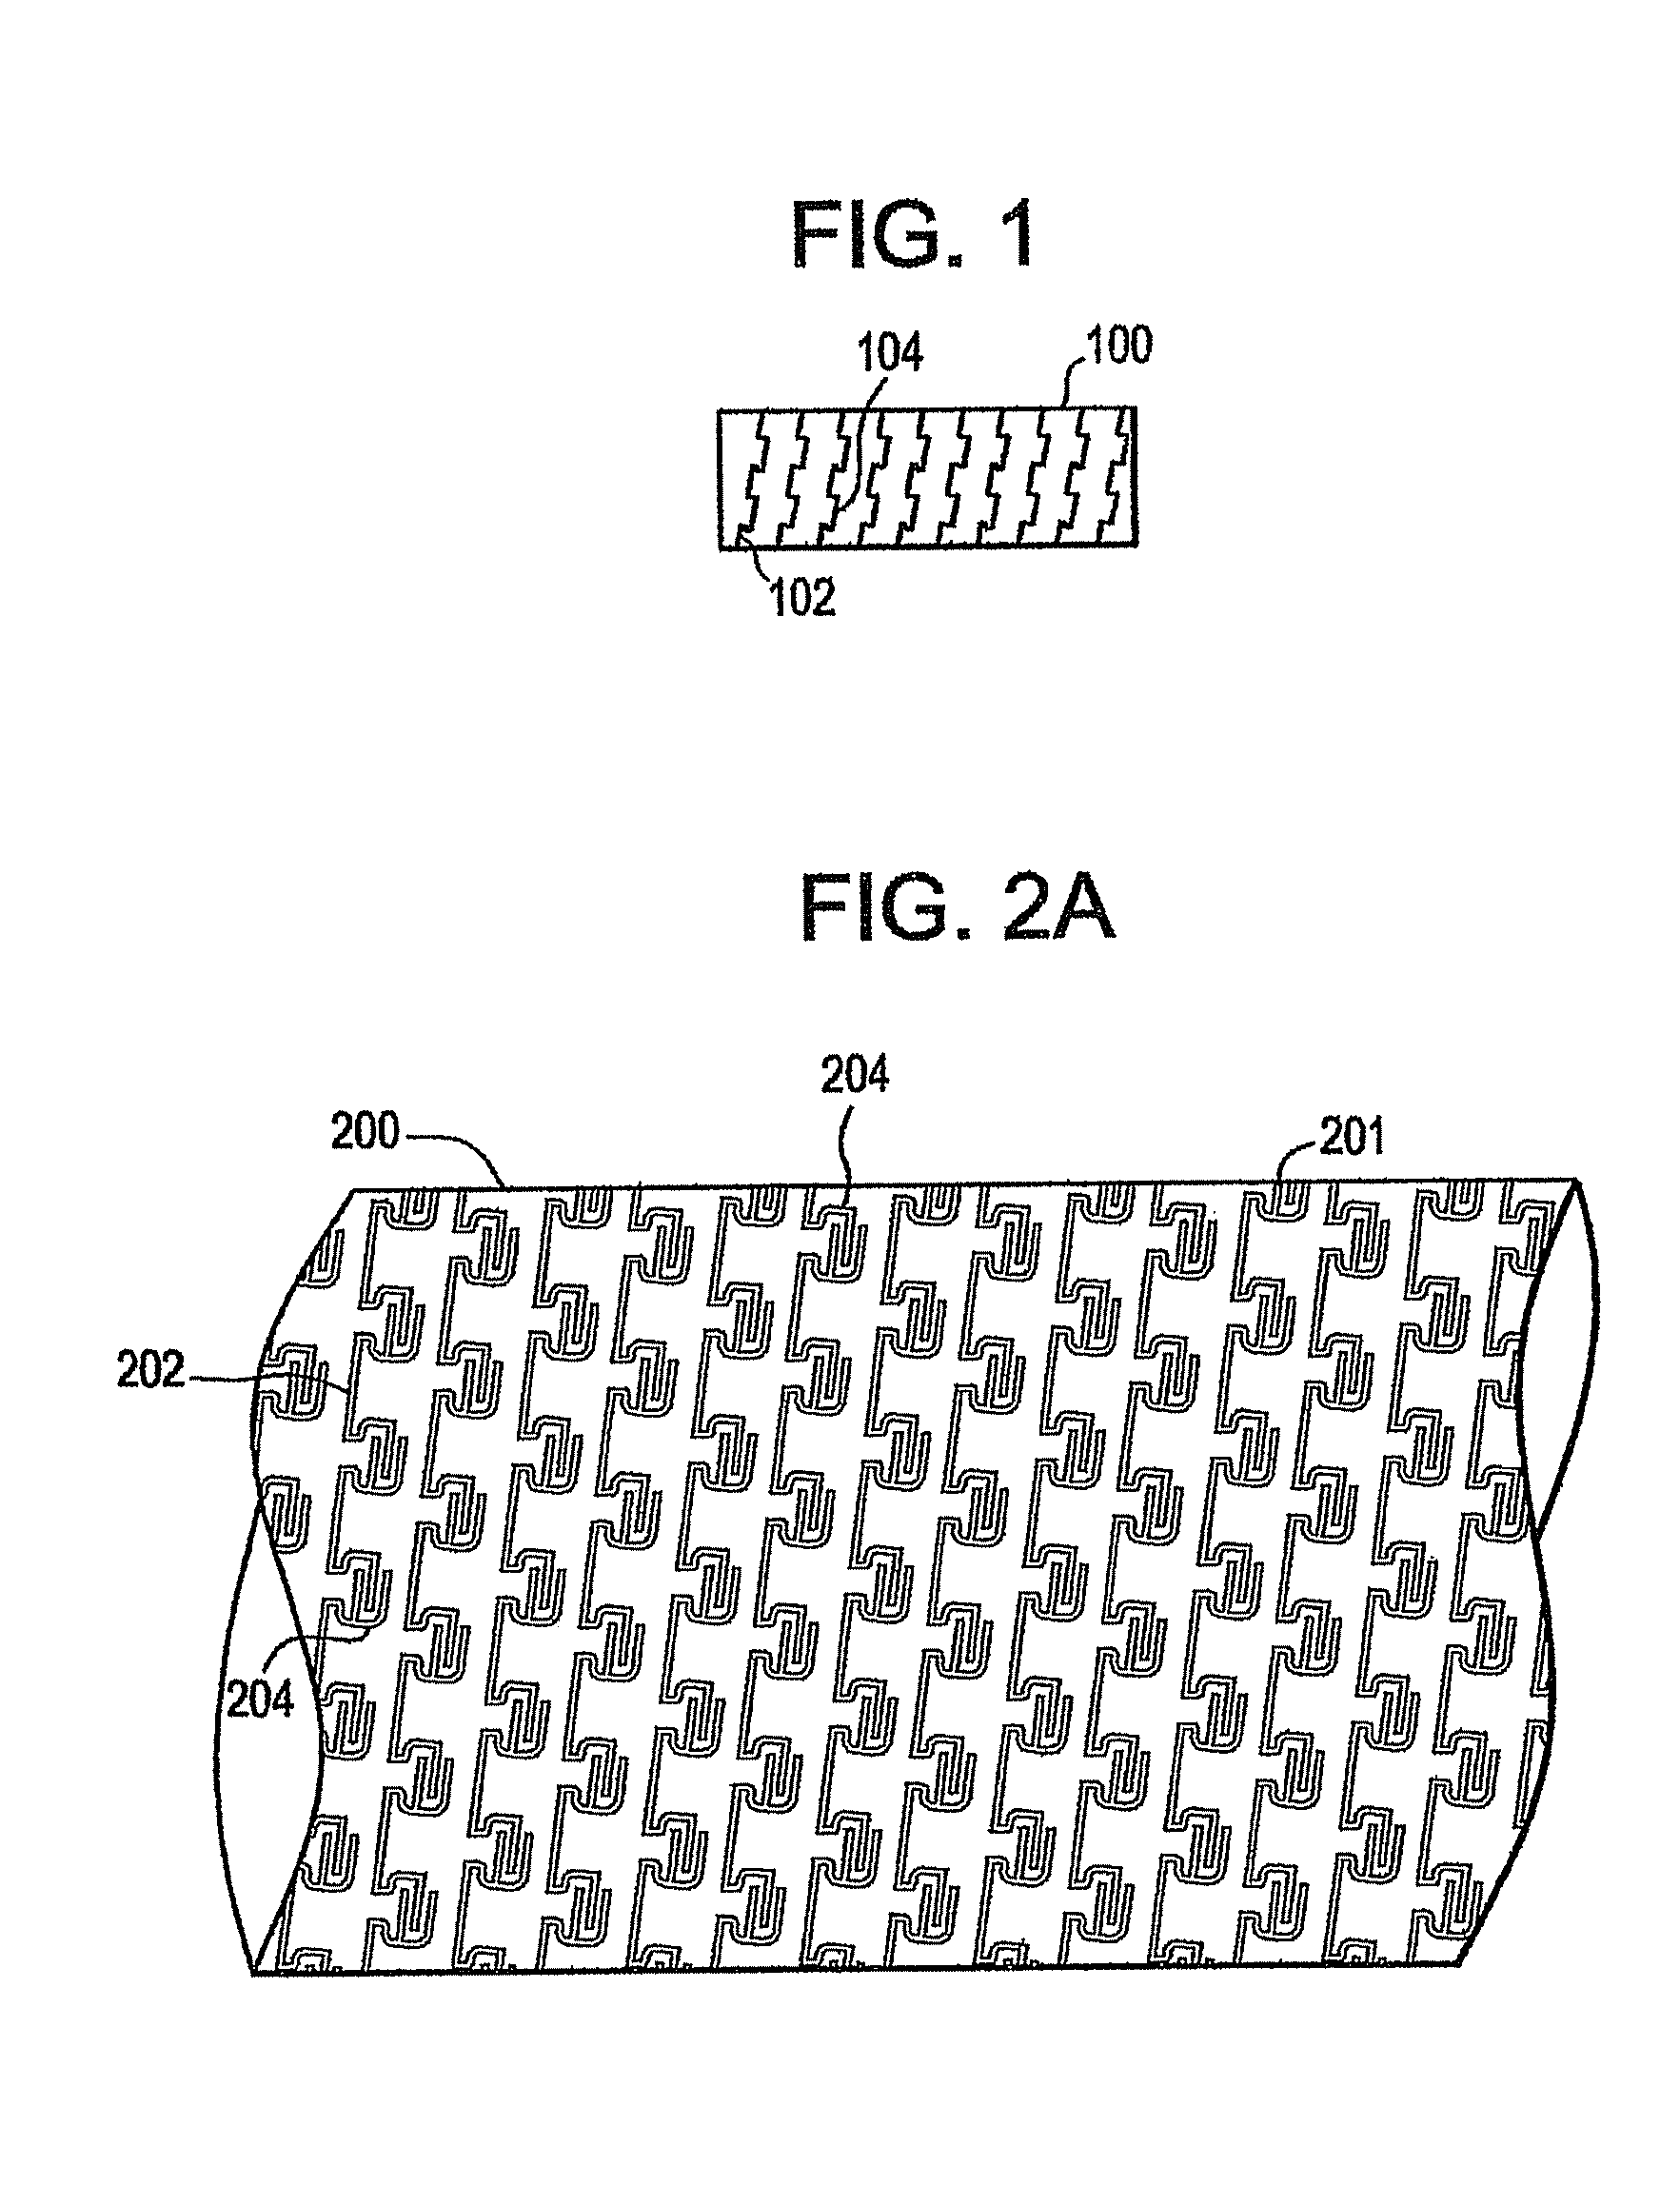 Highly flexible tubular device for medical use